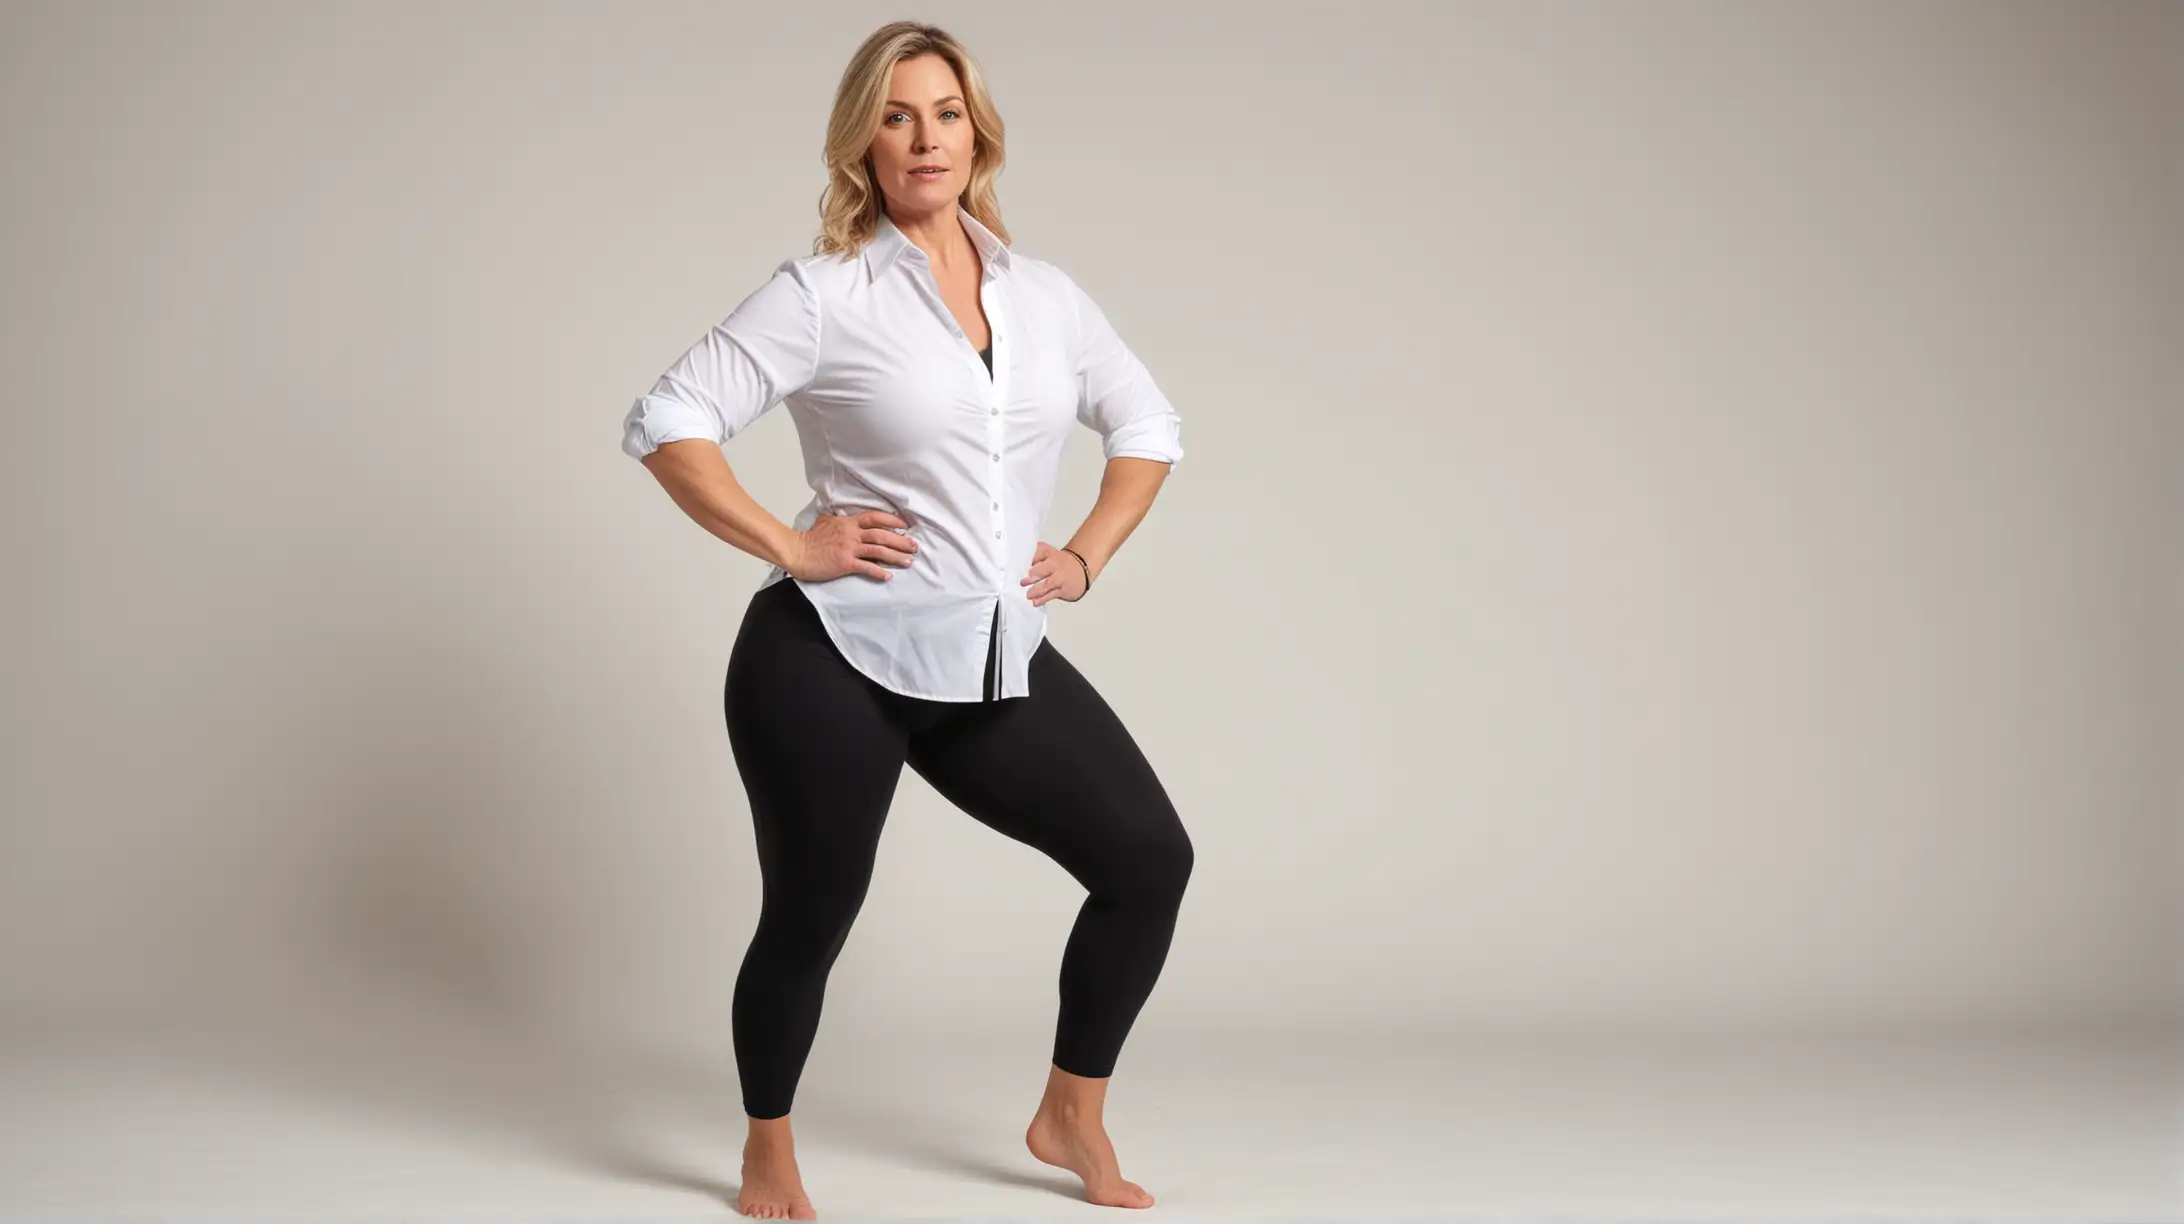 Mature Curvy Blonde Woman Exercising in White Button Down Shirt and Black Tights